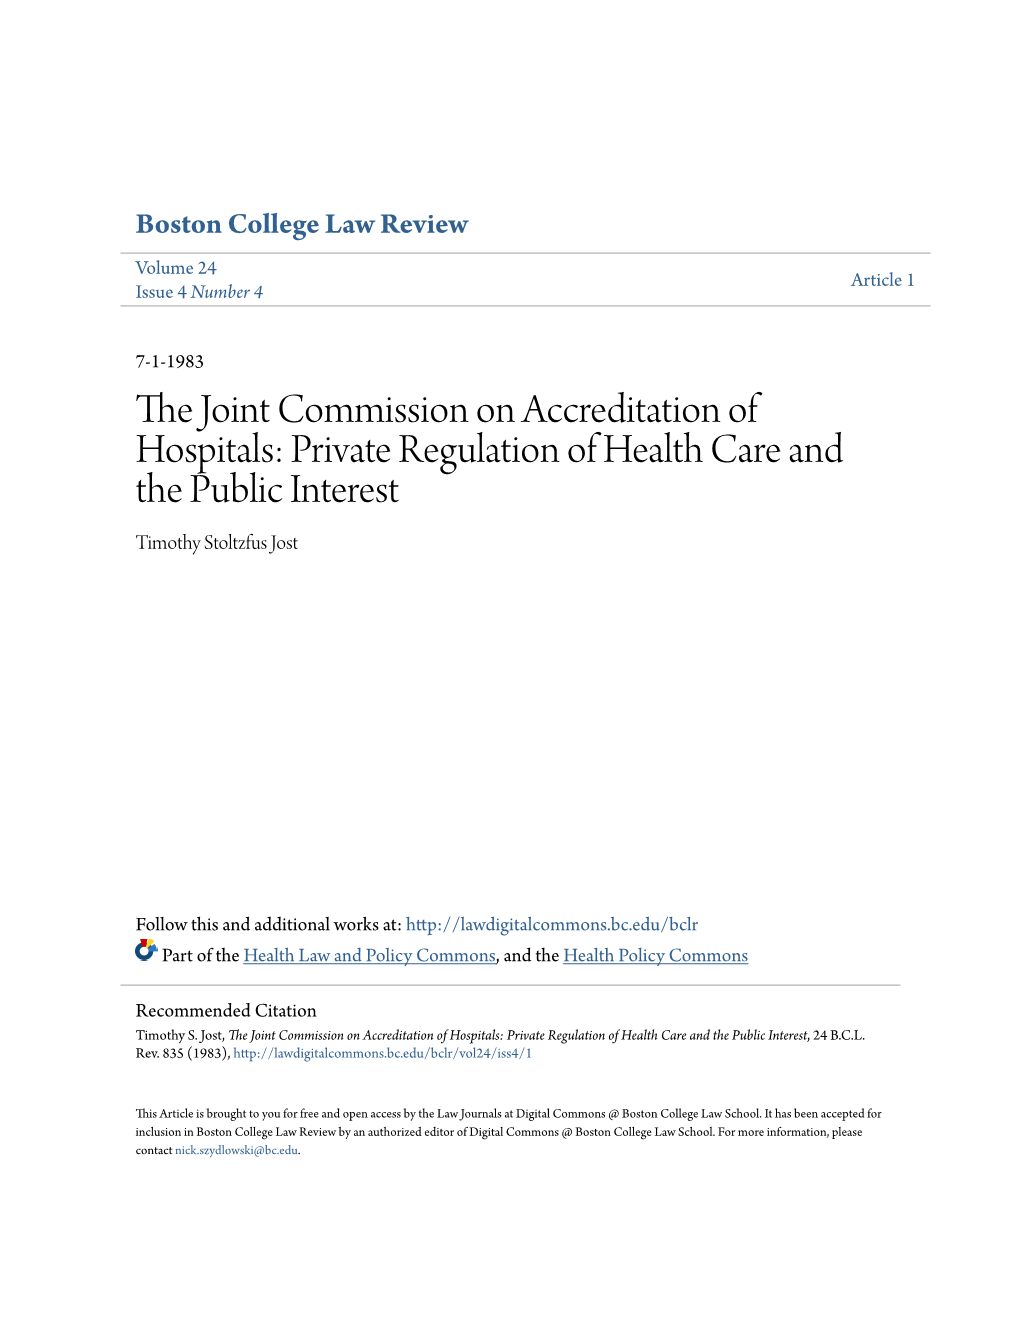 The Joint Commission on Accreditation of Hospitals: Private Regulation of Health Care and the Public Interest, 24 B.C.L